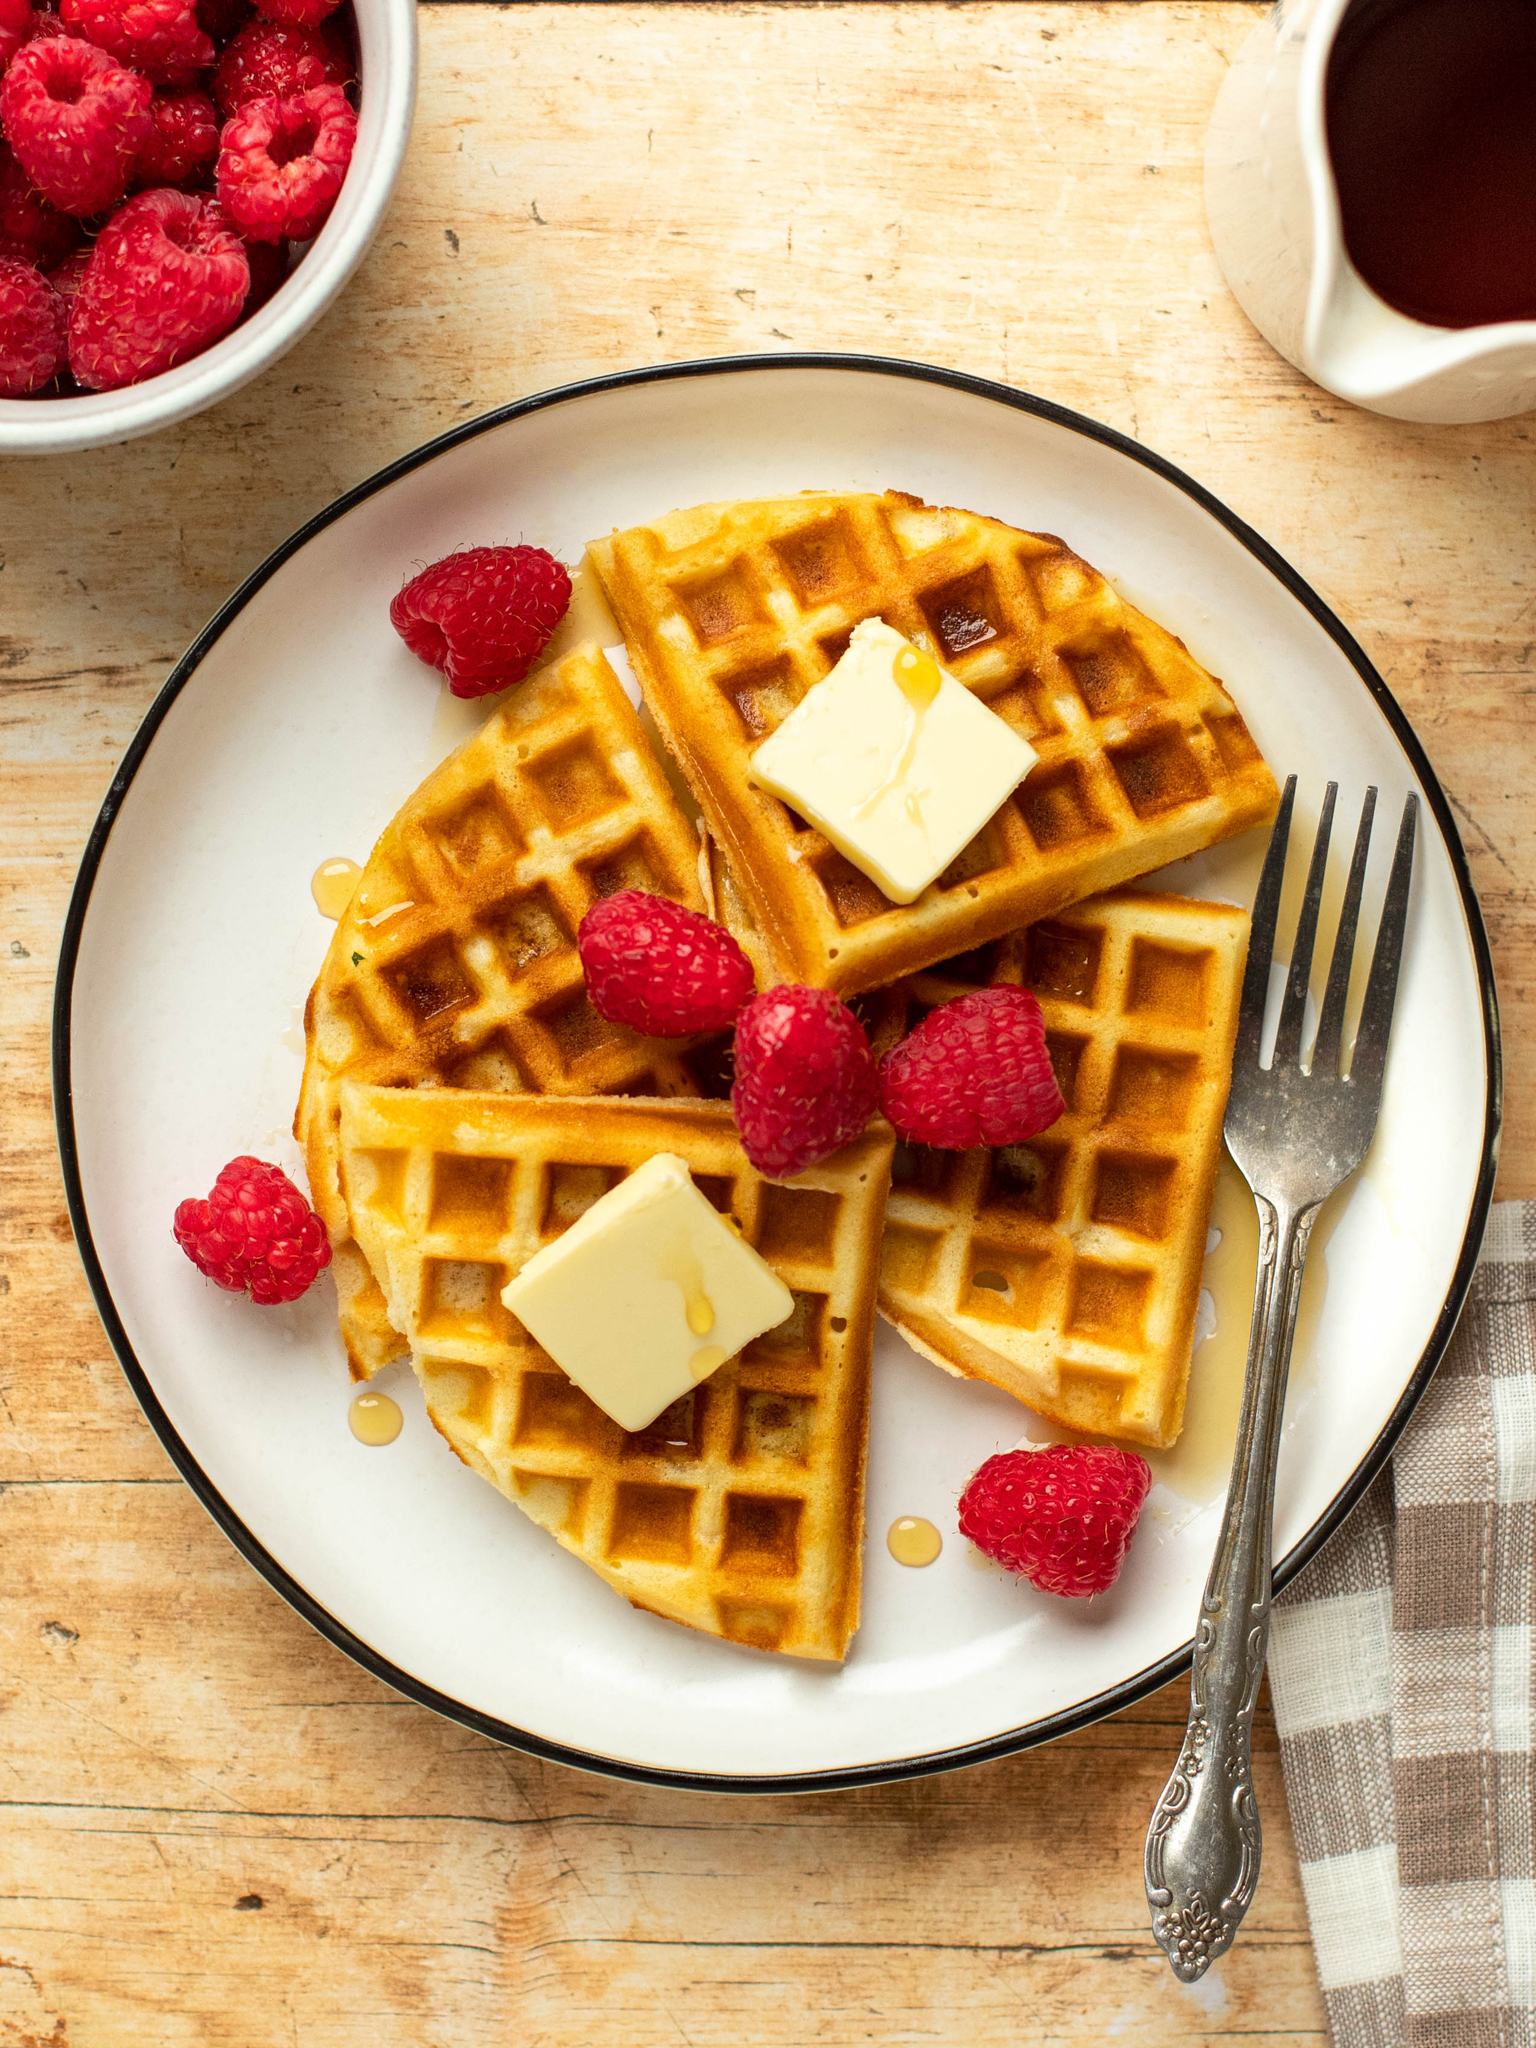 Simply Perfect Homemade Waffles - Seasons and Suppers